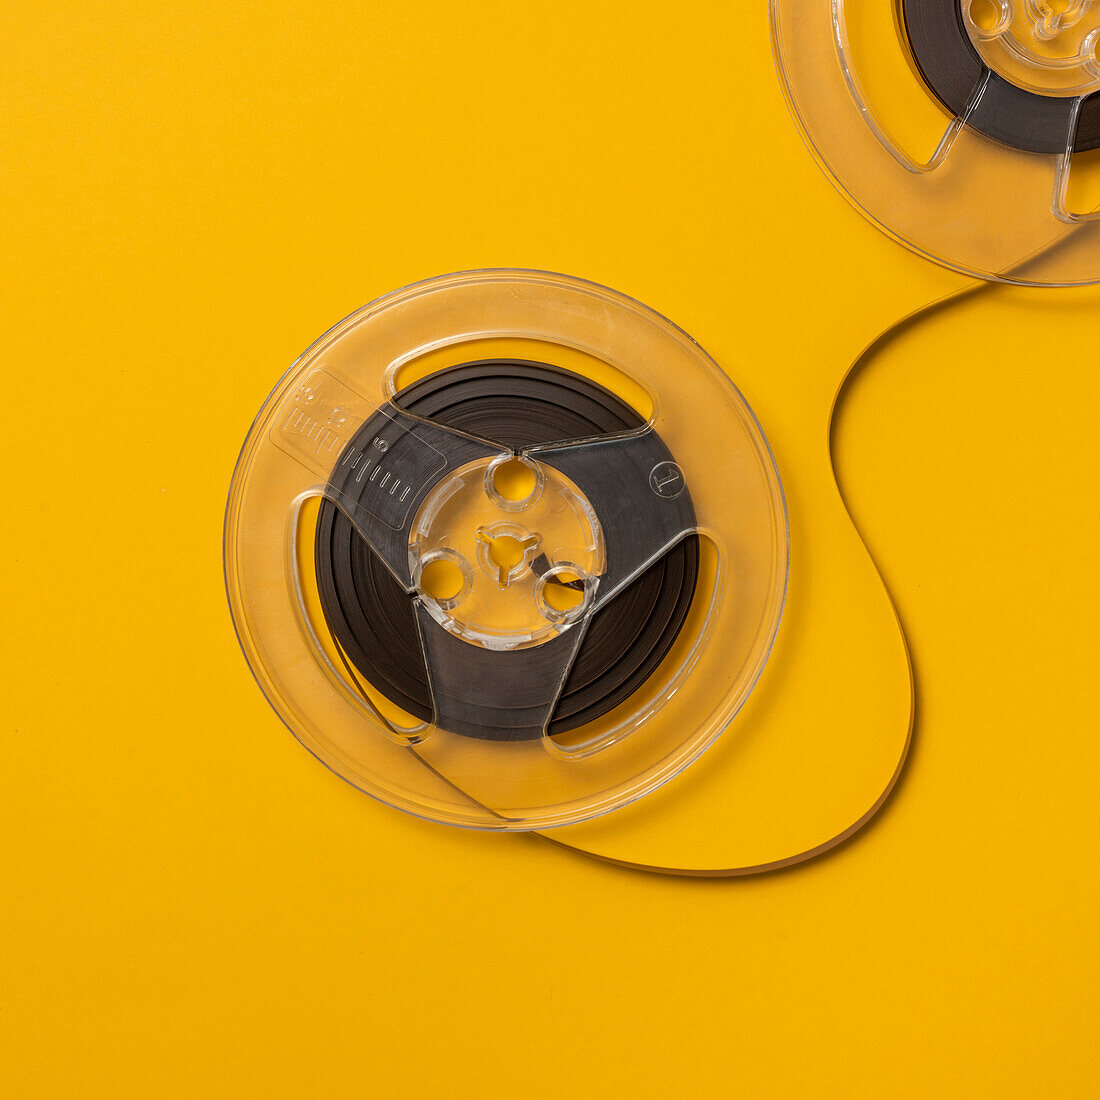 Overhead view of retro recording tape reels against yellow background